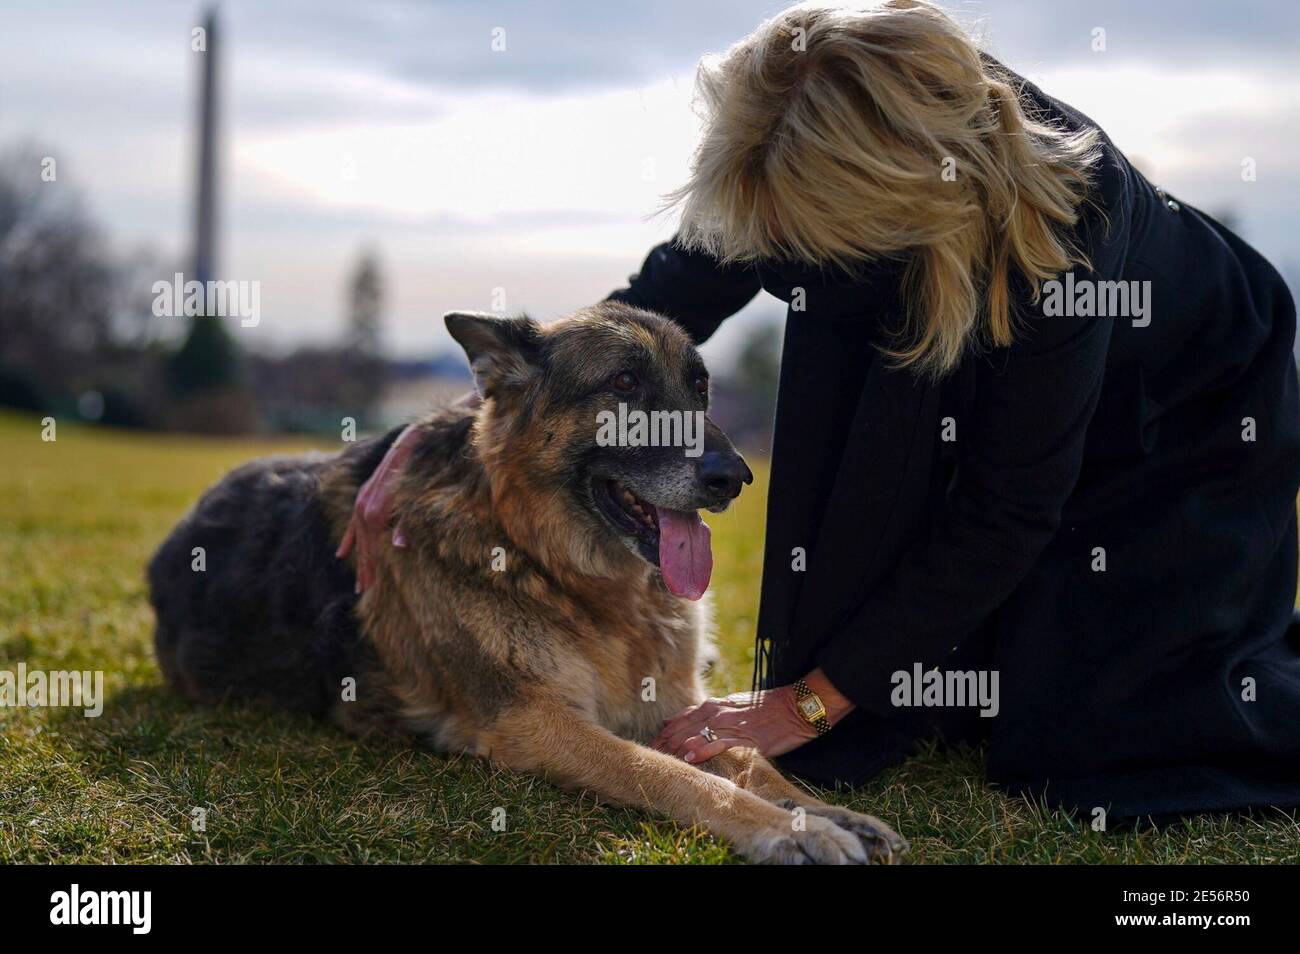 U.S First Lady Dr. Jill Biden, pets Champ Biden, a rescue dog on the South Lawn of the White House January 24, 2021 in Washington, D.C. The Bidens adopted the German shepherd in 2018 from the Delaware Humane Association. Stock Photo